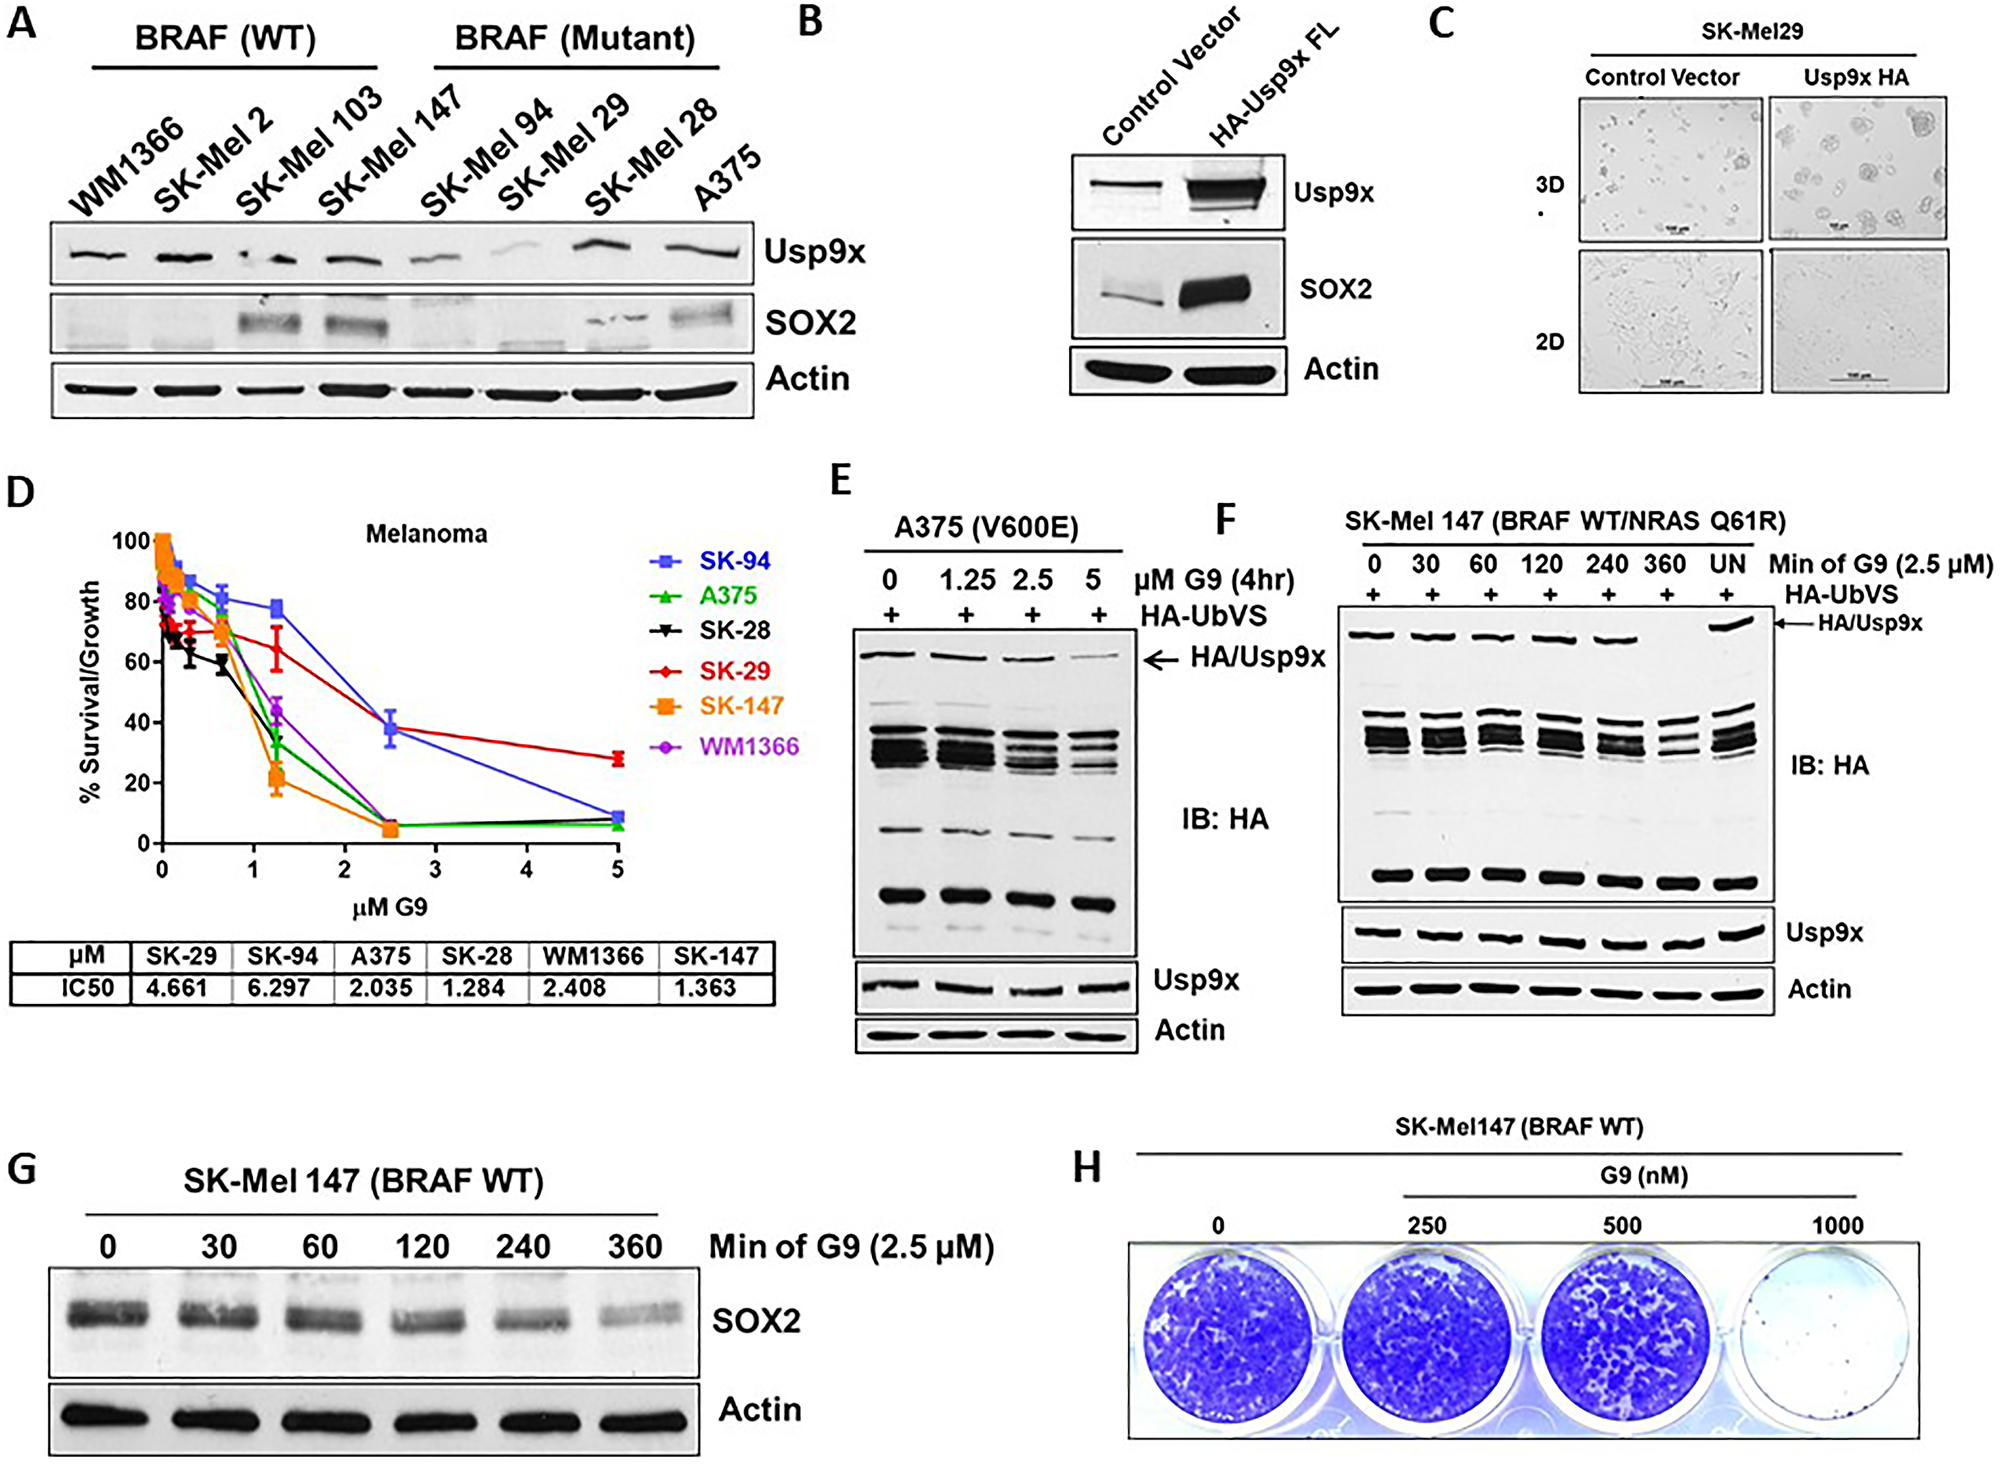 Melanoma cells that express Usp9x and SOX2 are vulnerable to G9.